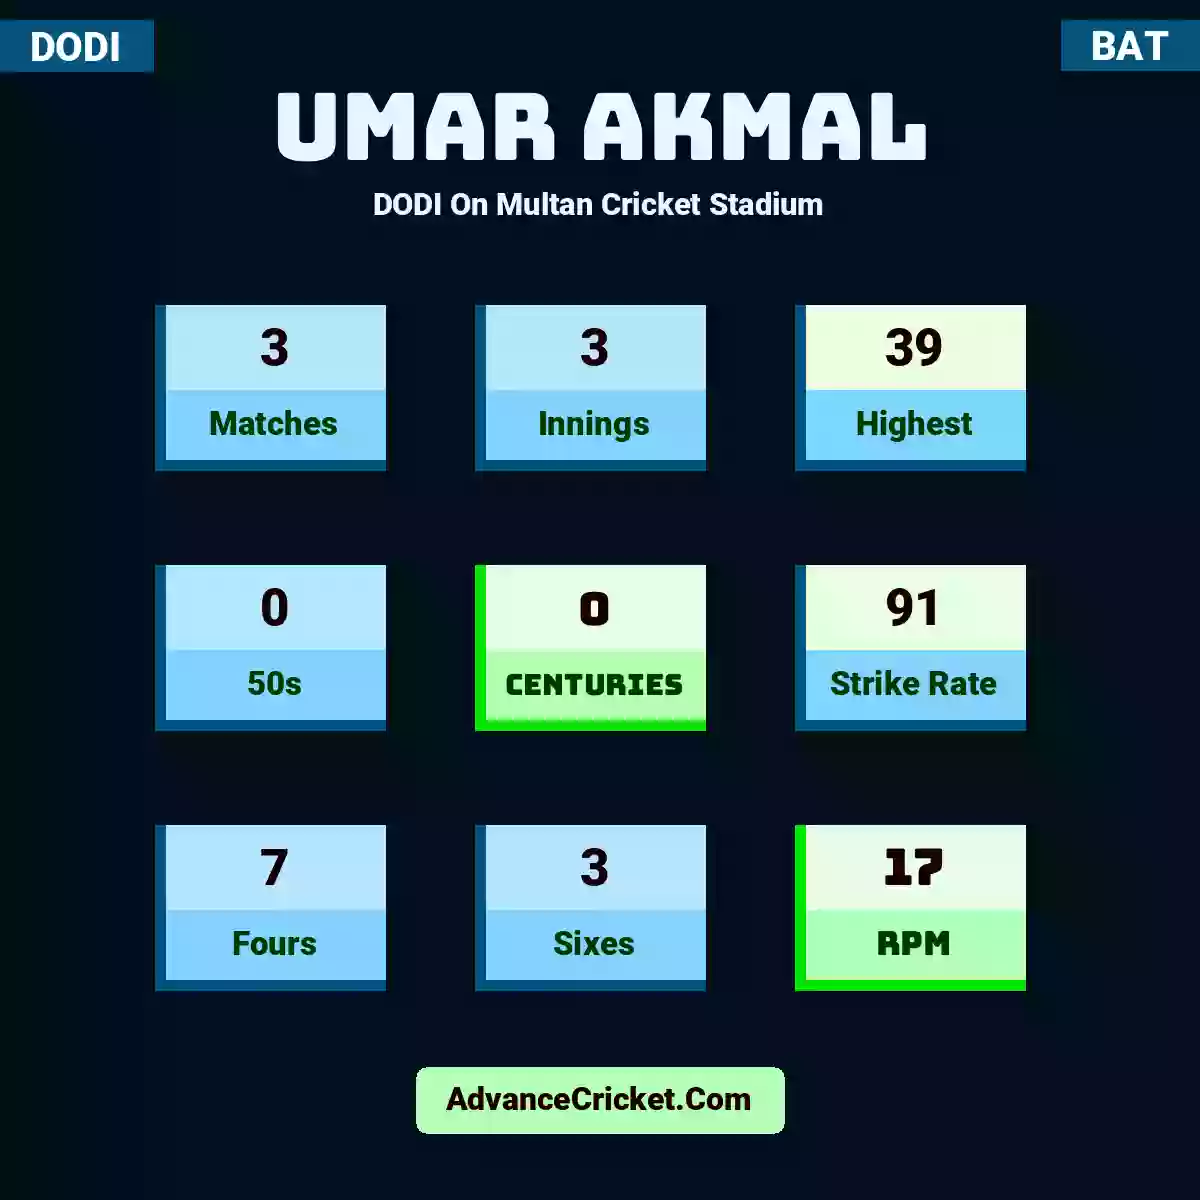 Umar Akmal DODI  On Multan Cricket Stadium, Umar Akmal played 3 matches, scored 39 runs as highest, 0 half-centuries, and 0 centuries, with a strike rate of 91. U.Akmal hit 7 fours and 3 sixes, with an RPM of 17.